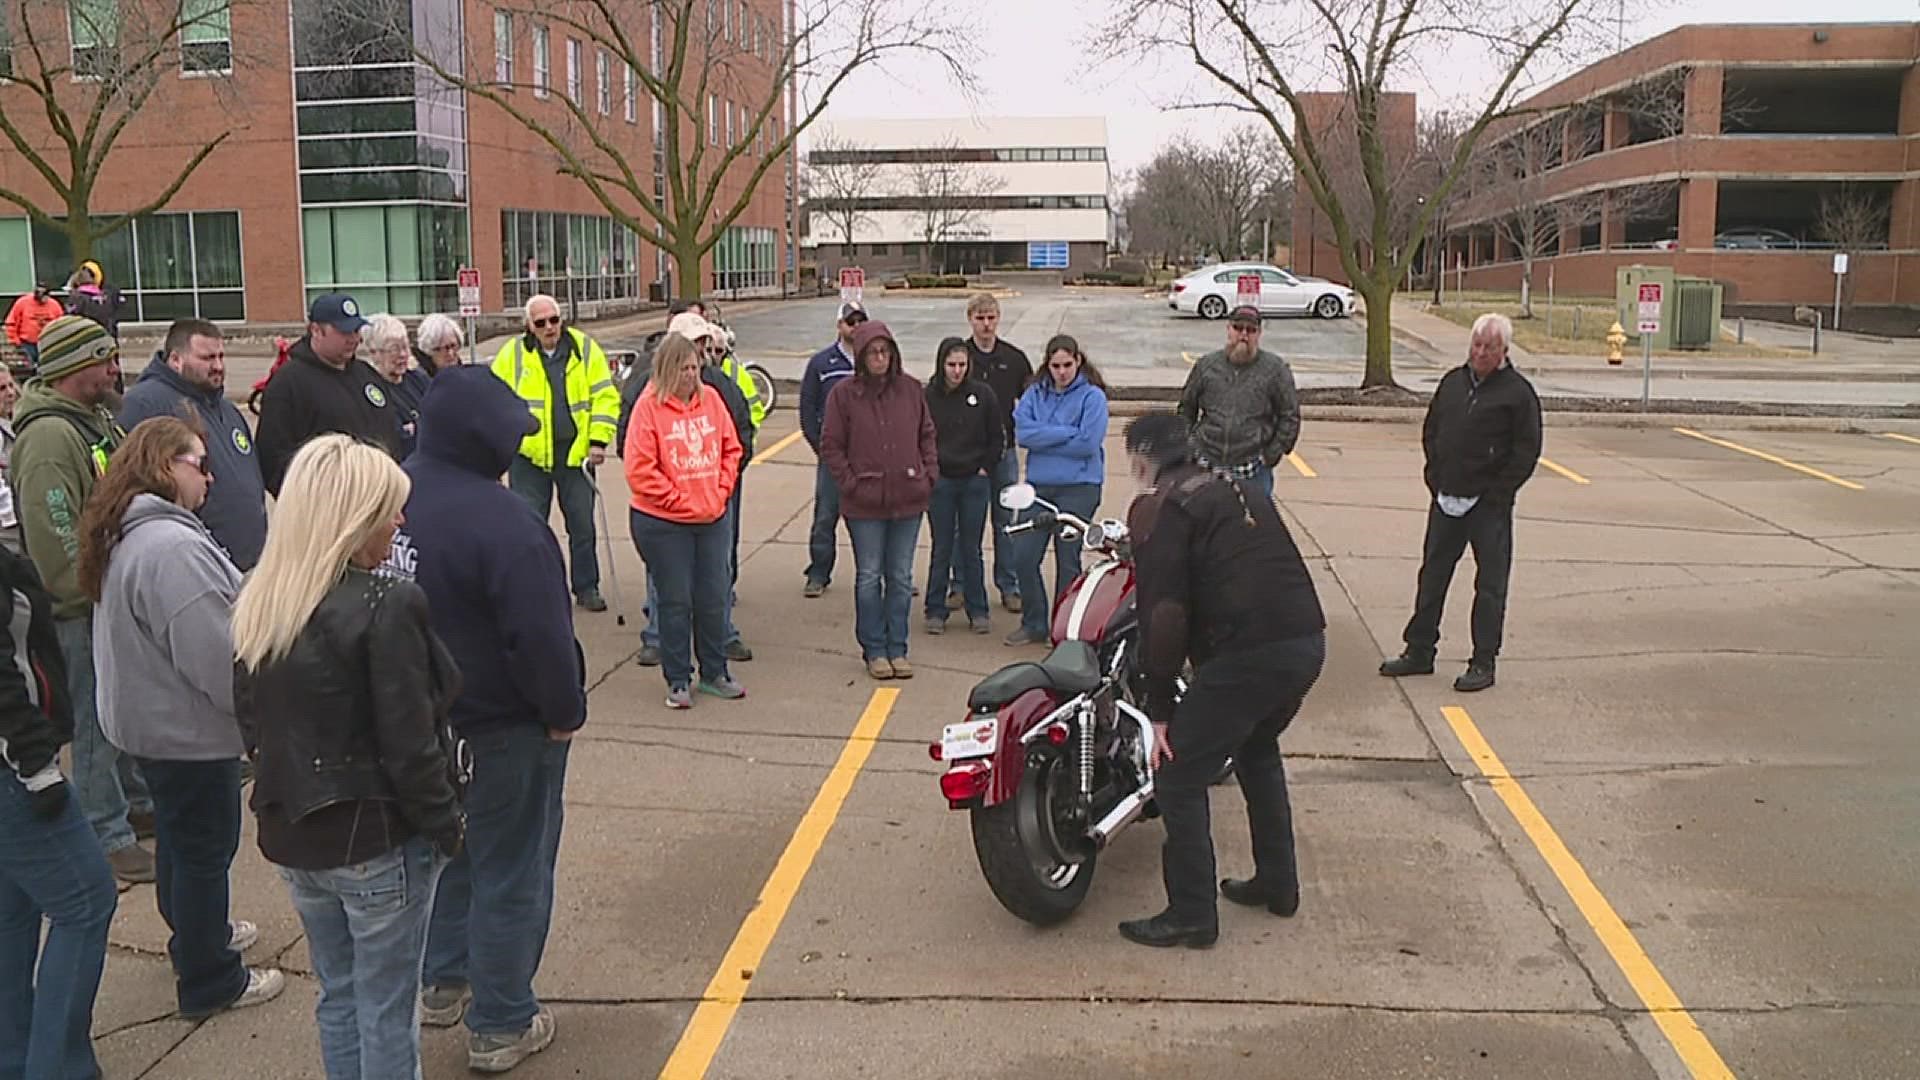 The annual training, coordinated by ABATE of Iowa, helps prepare emergency officials to respond to motorcycle accidents.